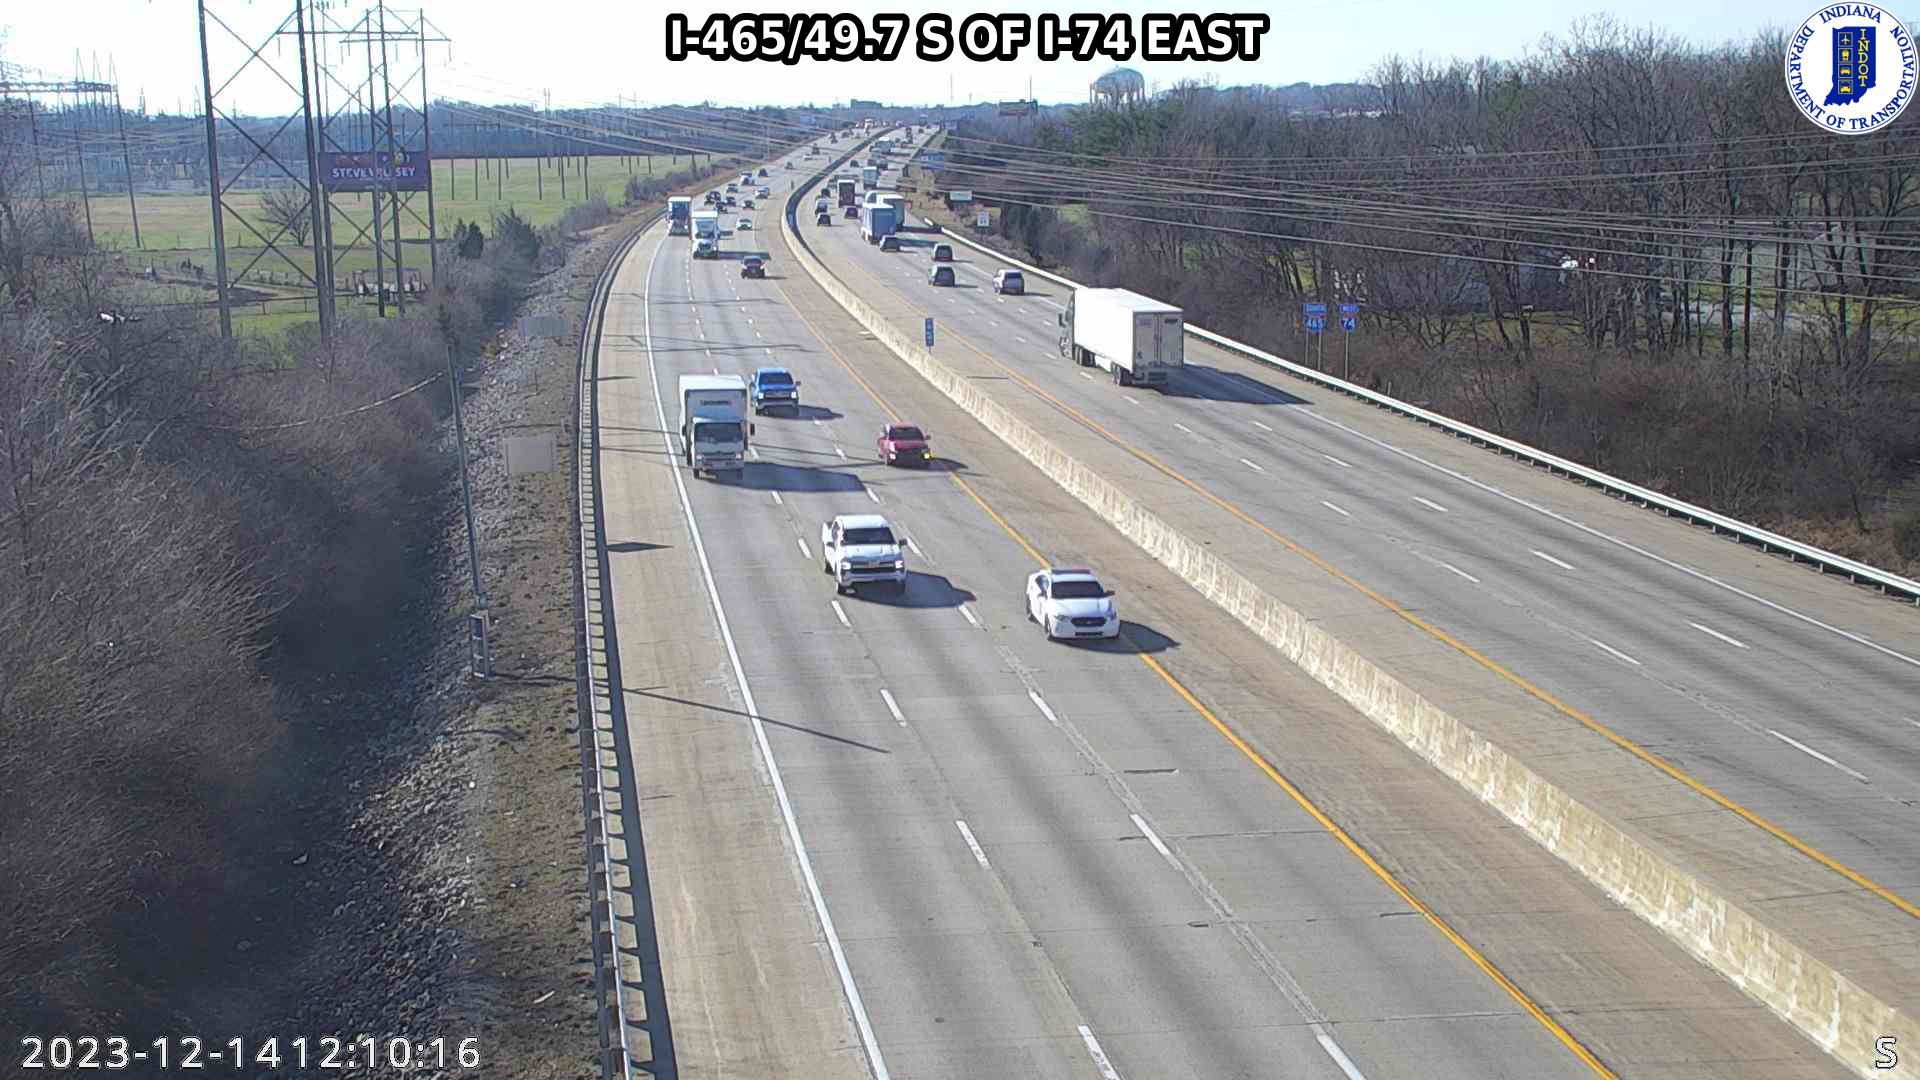 Traffic Cam Indianapolis › East: I-465: I-465/49.7 S OF I-74 EAST Player